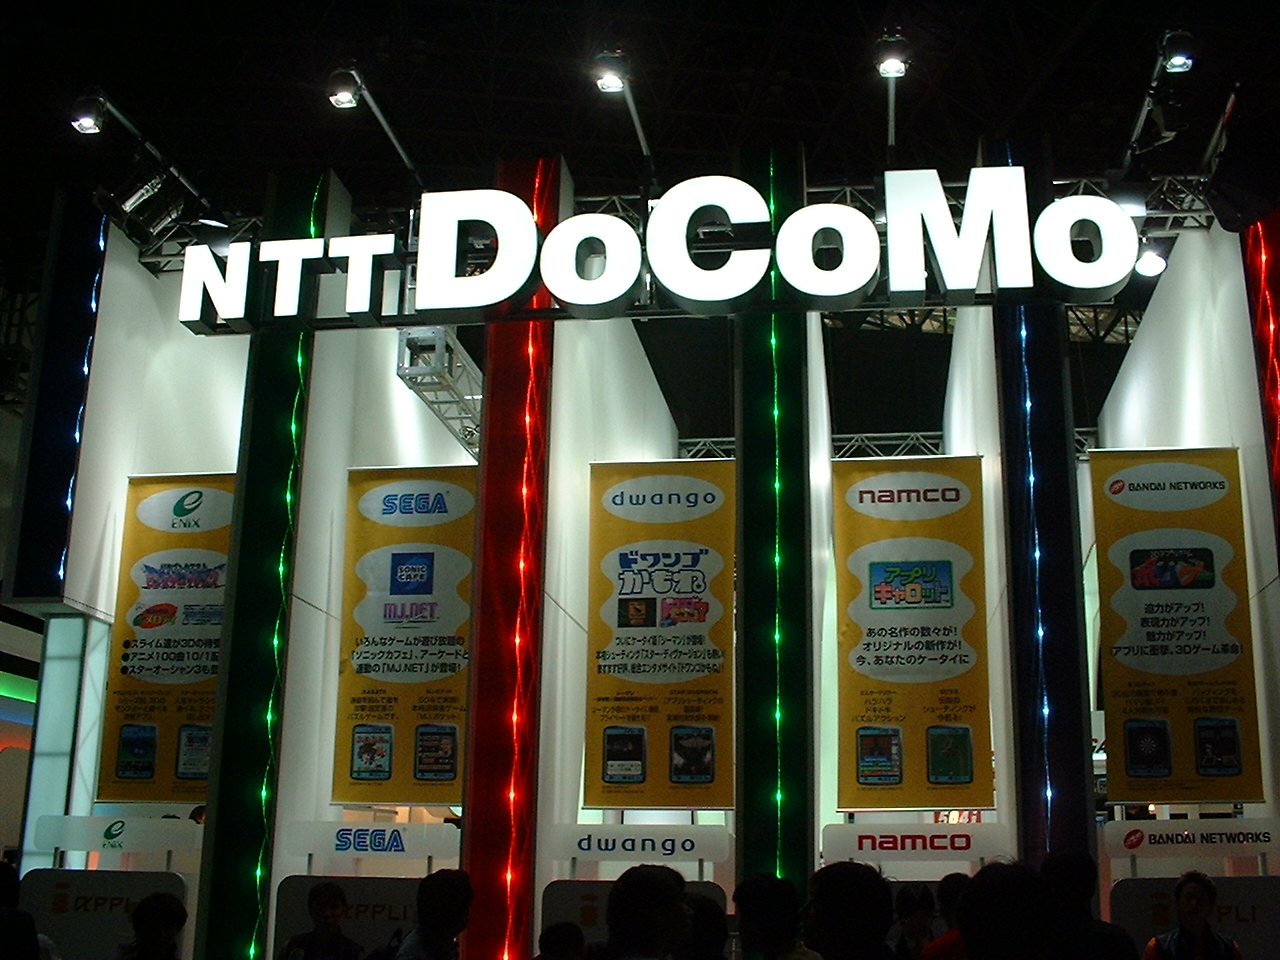 a large booth with the NTT Docomo logo